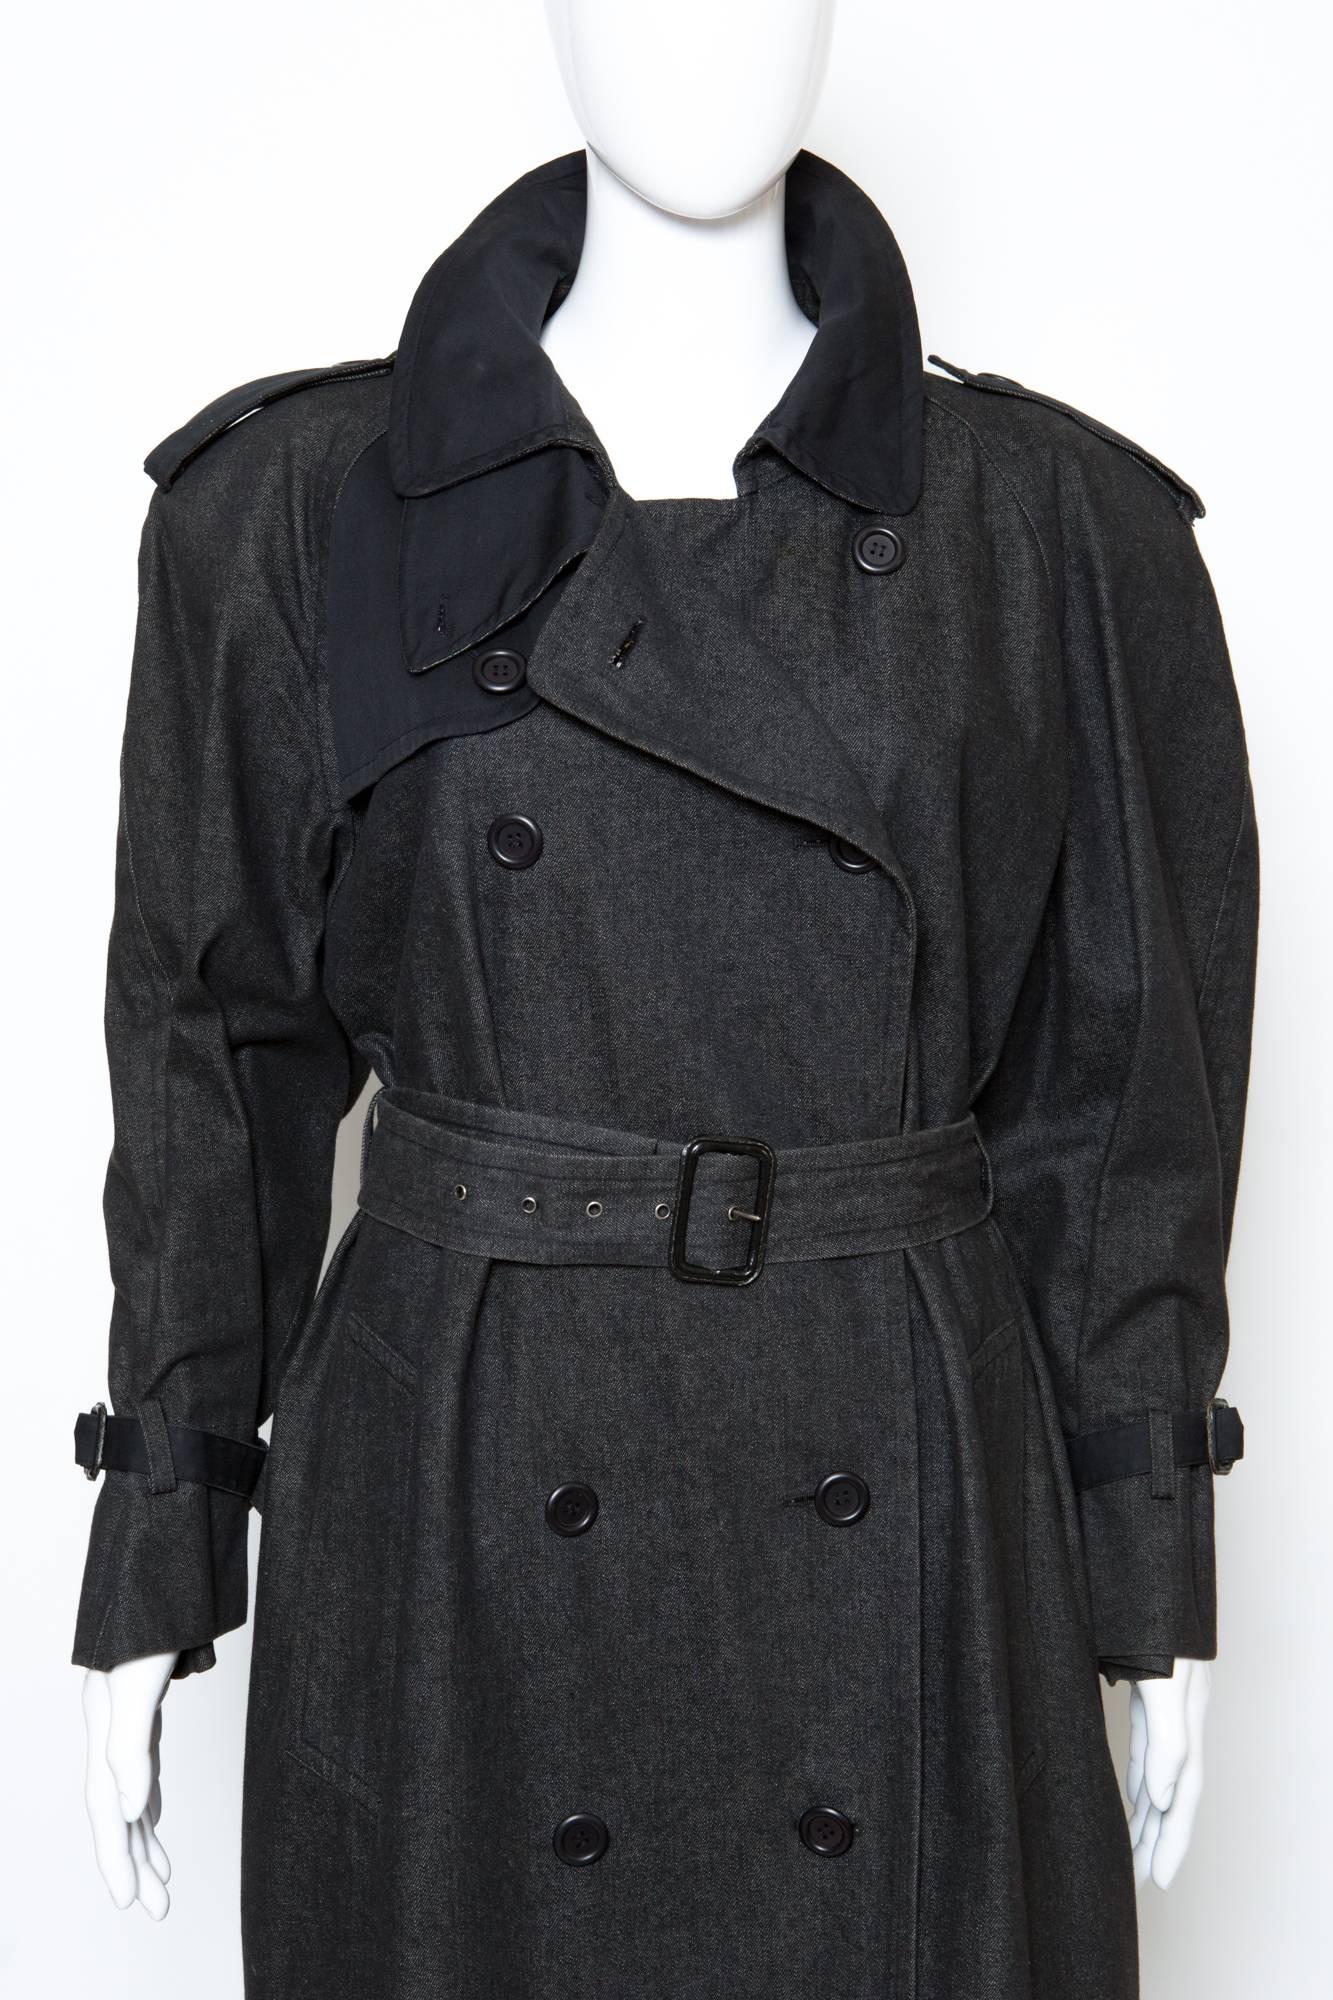 Yves Saint Laurent  black denim long trench-coat with plain black cotton details, featuring all trench details at shoulder, back and cuffs. 
This trench is bi-fabric with black cotton and gets a double breast front opening, and a seperated belt